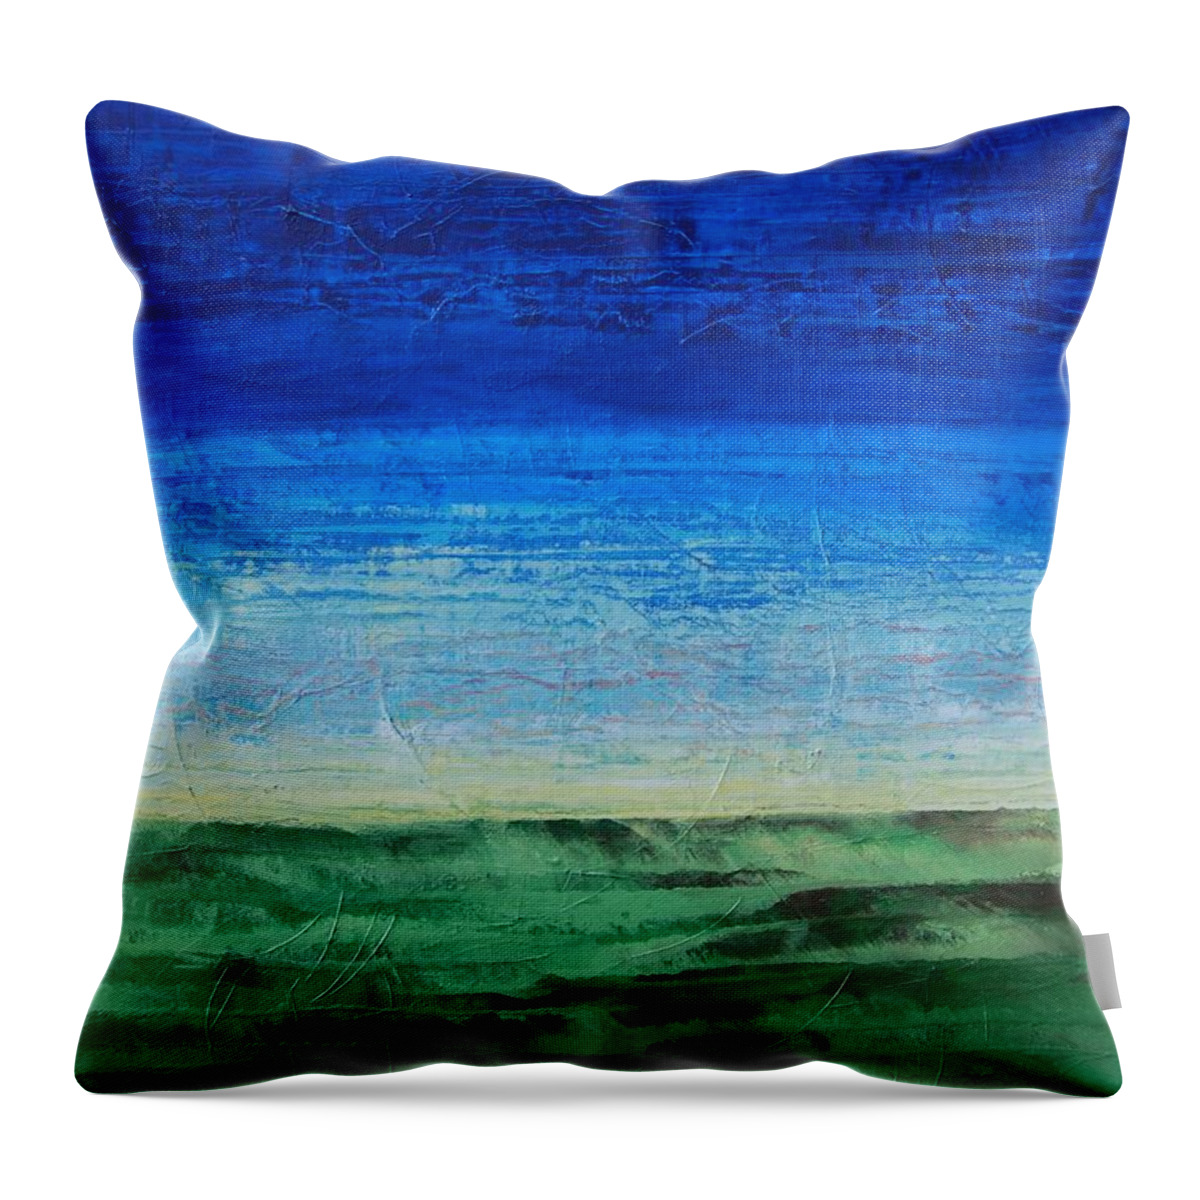 Blue Throw Pillow featuring the painting Study of Earth and Sky by Linda Bailey